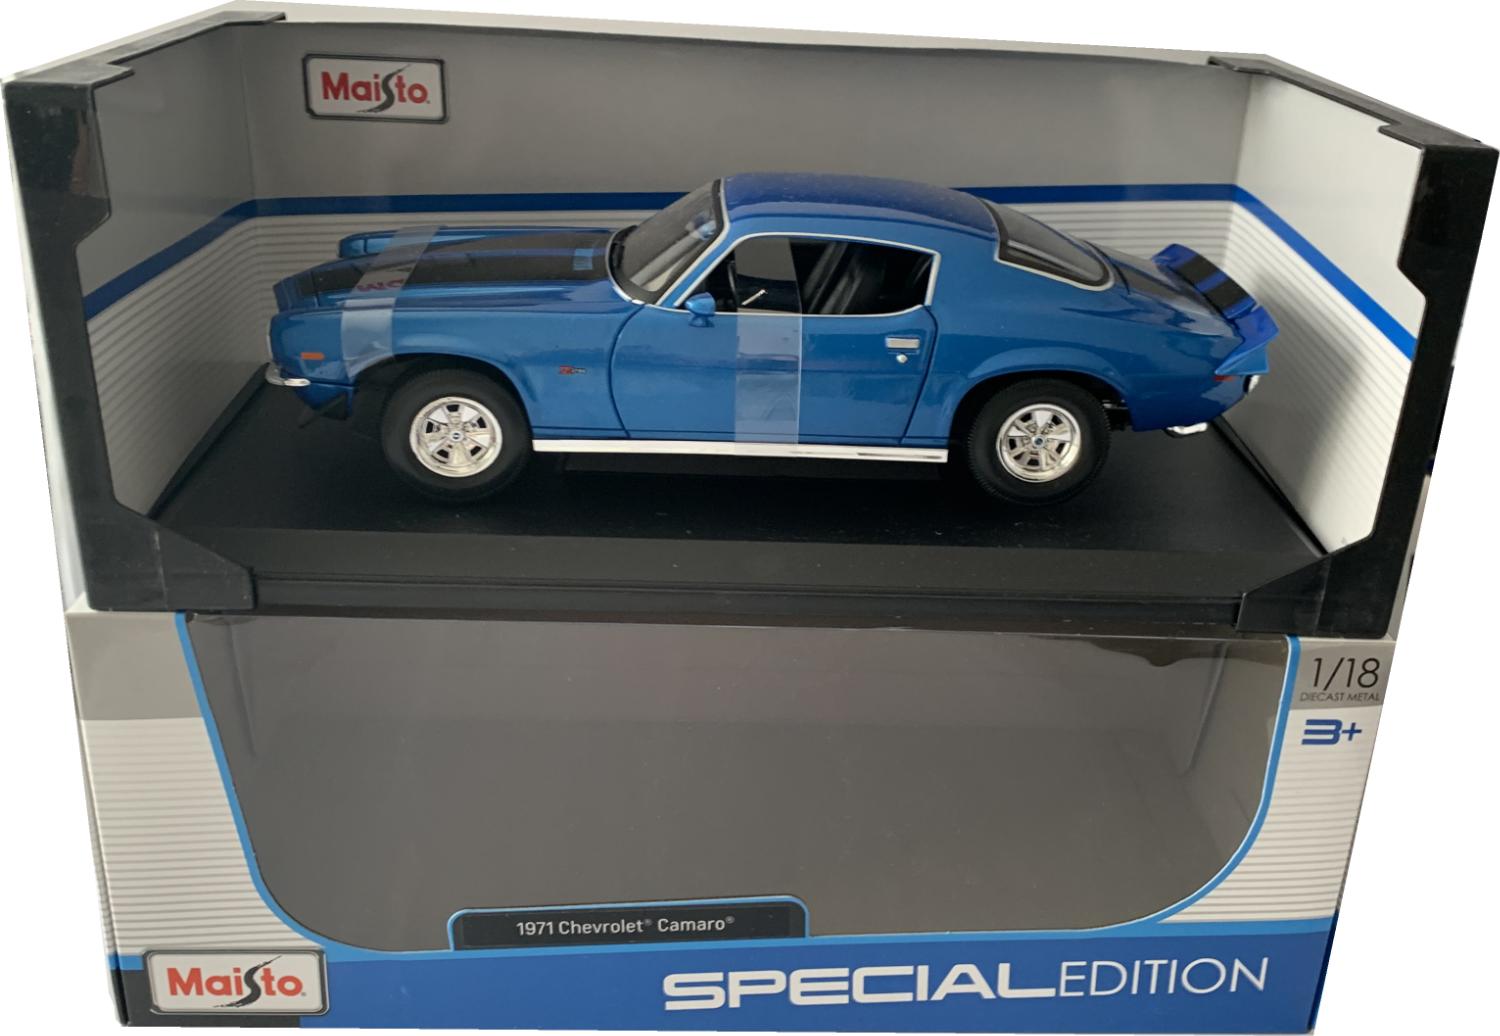 An excellent scale model of the Chevrolet Camaro Z/28 with high level of detail throughout, all authentically recreated.   Model is presented on a removable plinth in a window display box.  The car is approx. 26 cm long and the presentation box is 33 cm long